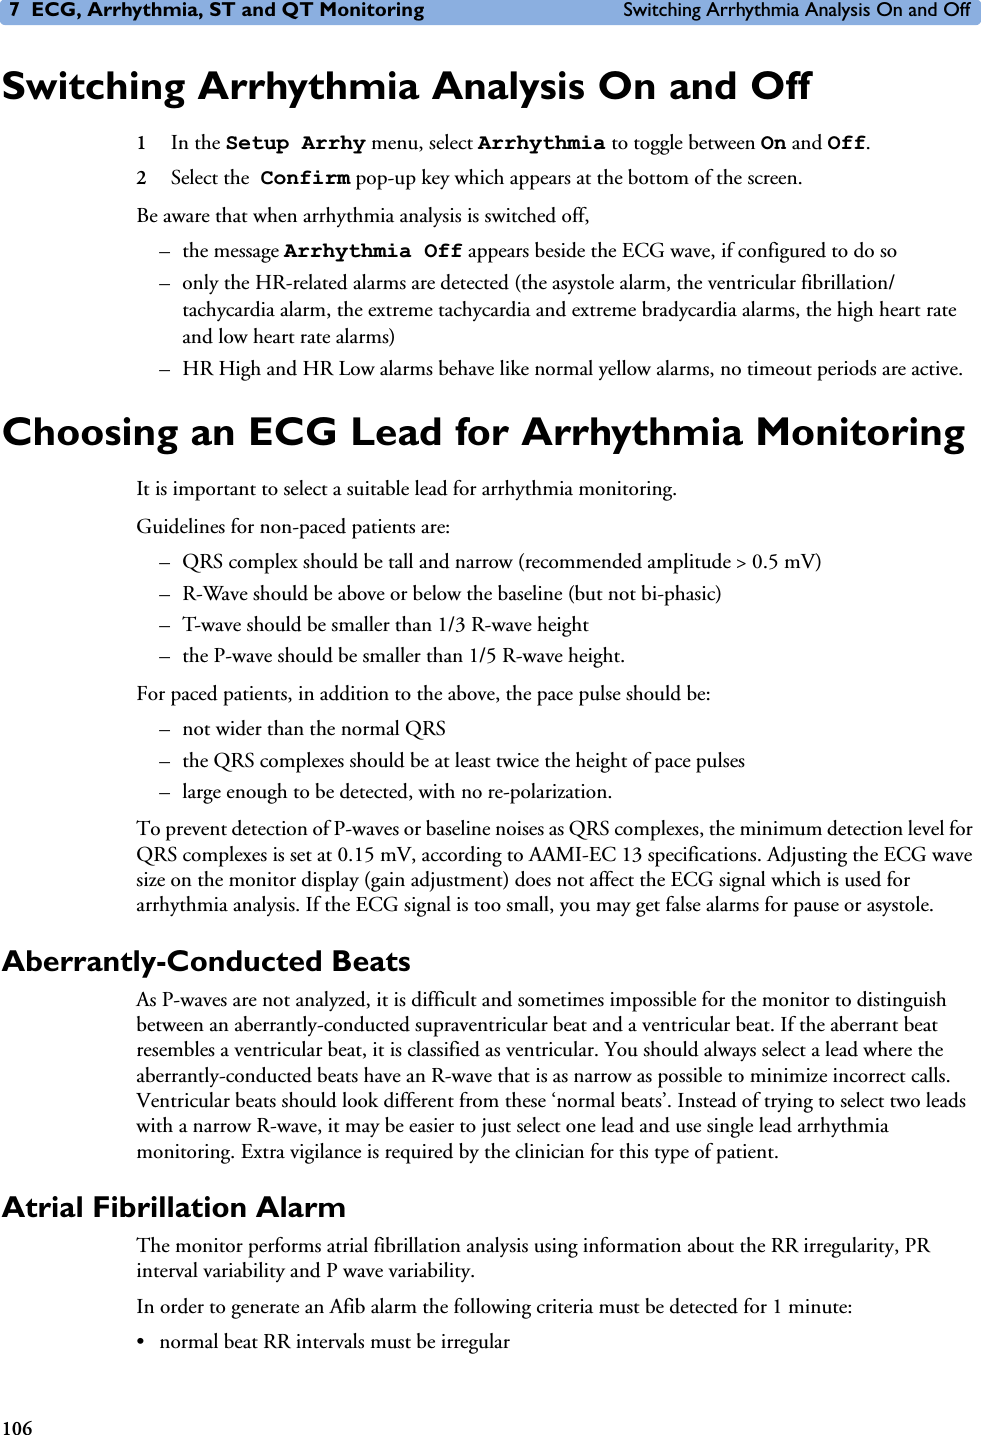 7 ECG, Arrhythmia, ST and QT Monitoring Switching Arrhythmia Analysis On and Off106Switching Arrhythmia Analysis On and Off1In the Setup Arrhy menu, select Arrhythmia to toggle between On and Off.2Select the Confirm pop-up key which appears at the bottom of the screen.Be aware that when arrhythmia analysis is switched off,–the message Arrhythmia Off appears beside the ECG wave, if configured to do so– only the HR-related alarms are detected (the asystole alarm, the ventricular fibrillation/tachycardia alarm, the extreme tachycardia and extreme bradycardia alarms, the high heart rate and low heart rate alarms)– HR High and HR Low alarms behave like normal yellow alarms, no timeout periods are active.Choosing an ECG Lead for Arrhythmia MonitoringIt is important to select a suitable lead for arrhythmia monitoring. Guidelines for non-paced patients are: – QRS complex should be tall and narrow (recommended amplitude &gt; 0.5 mV) – R-Wave should be above or below the baseline (but not bi-phasic) – T-wave should be smaller than 1/3 R-wave height – the P-wave should be smaller than 1/5 R-wave height.For paced patients, in addition to the above, the pace pulse should be:– not wider than the normal QRS– the QRS complexes should be at least twice the height of pace pulses– large enough to be detected, with no re-polarization.To prevent detection of P-waves or baseline noises as QRS complexes, the minimum detection level for QRS complexes is set at 0.15 mV, according to AAMI-EC 13 specifications. Adjusting the ECG wave size on the monitor display (gain adjustment) does not affect the ECG signal which is used for arrhythmia analysis. If the ECG signal is too small, you may get false alarms for pause or asystole. Aberrantly-Conducted BeatsAs P-waves are not analyzed, it is difficult and sometimes impossible for the monitor to distinguish between an aberrantly-conducted supraventricular beat and a ventricular beat. If the aberrant beat resembles a ventricular beat, it is classified as ventricular. You should always select a lead where the aberrantly-conducted beats have an R-wave that is as narrow as possible to minimize incorrect calls. Ventricular beats should look different from these ‘normal beats’. Instead of trying to select two leads with a narrow R-wave, it may be easier to just select one lead and use single lead arrhythmia monitoring. Extra vigilance is required by the clinician for this type of patient.Atrial Fibrillation AlarmThe monitor performs atrial fibrillation analysis using information about the RR irregularity, PR interval variability and P wave variability.In order to generate an Afib alarm the following criteria must be detected for 1 minute:• normal beat RR intervals must be irregular